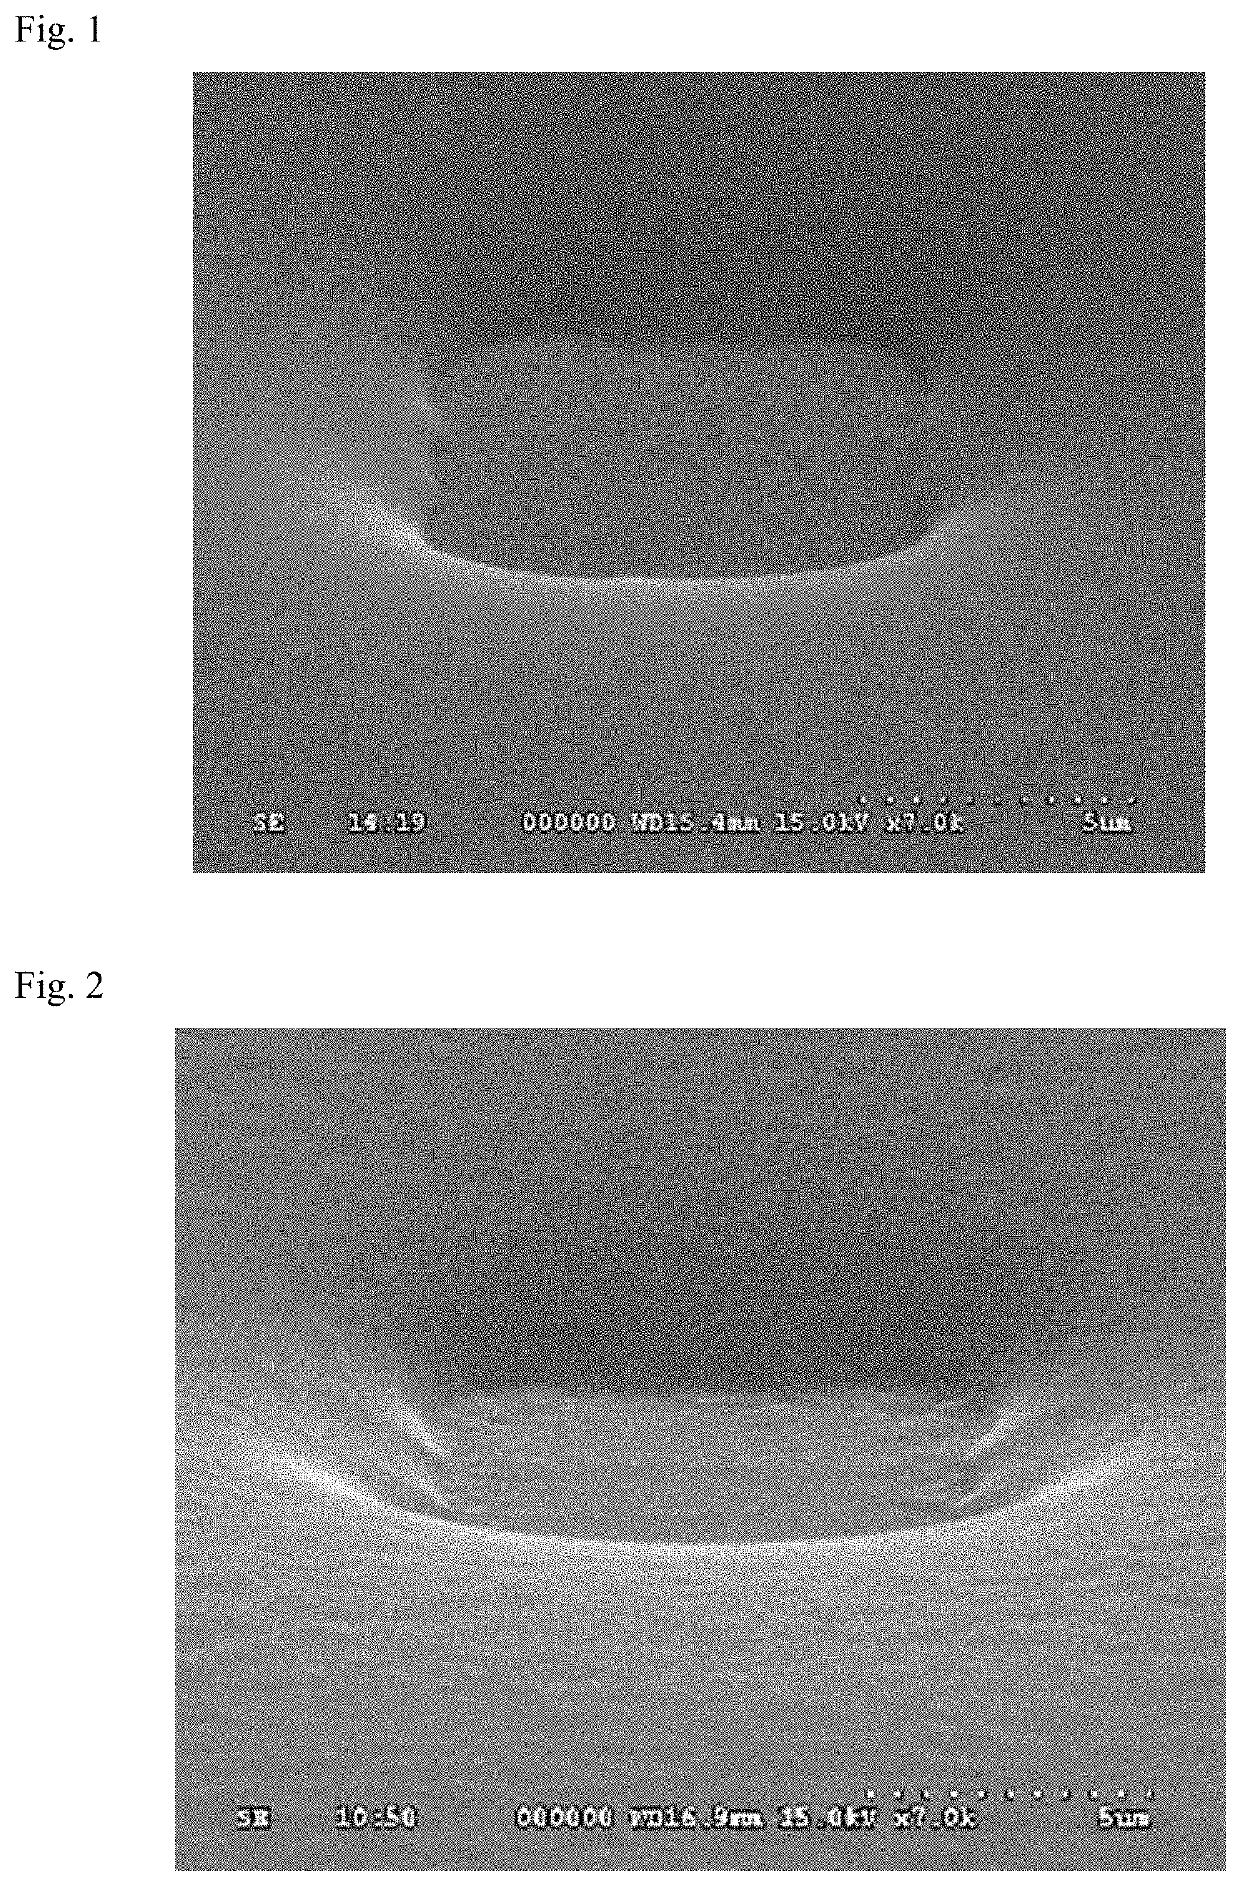 Positive-type photosensitive resin composition and cured film prepared therefrom